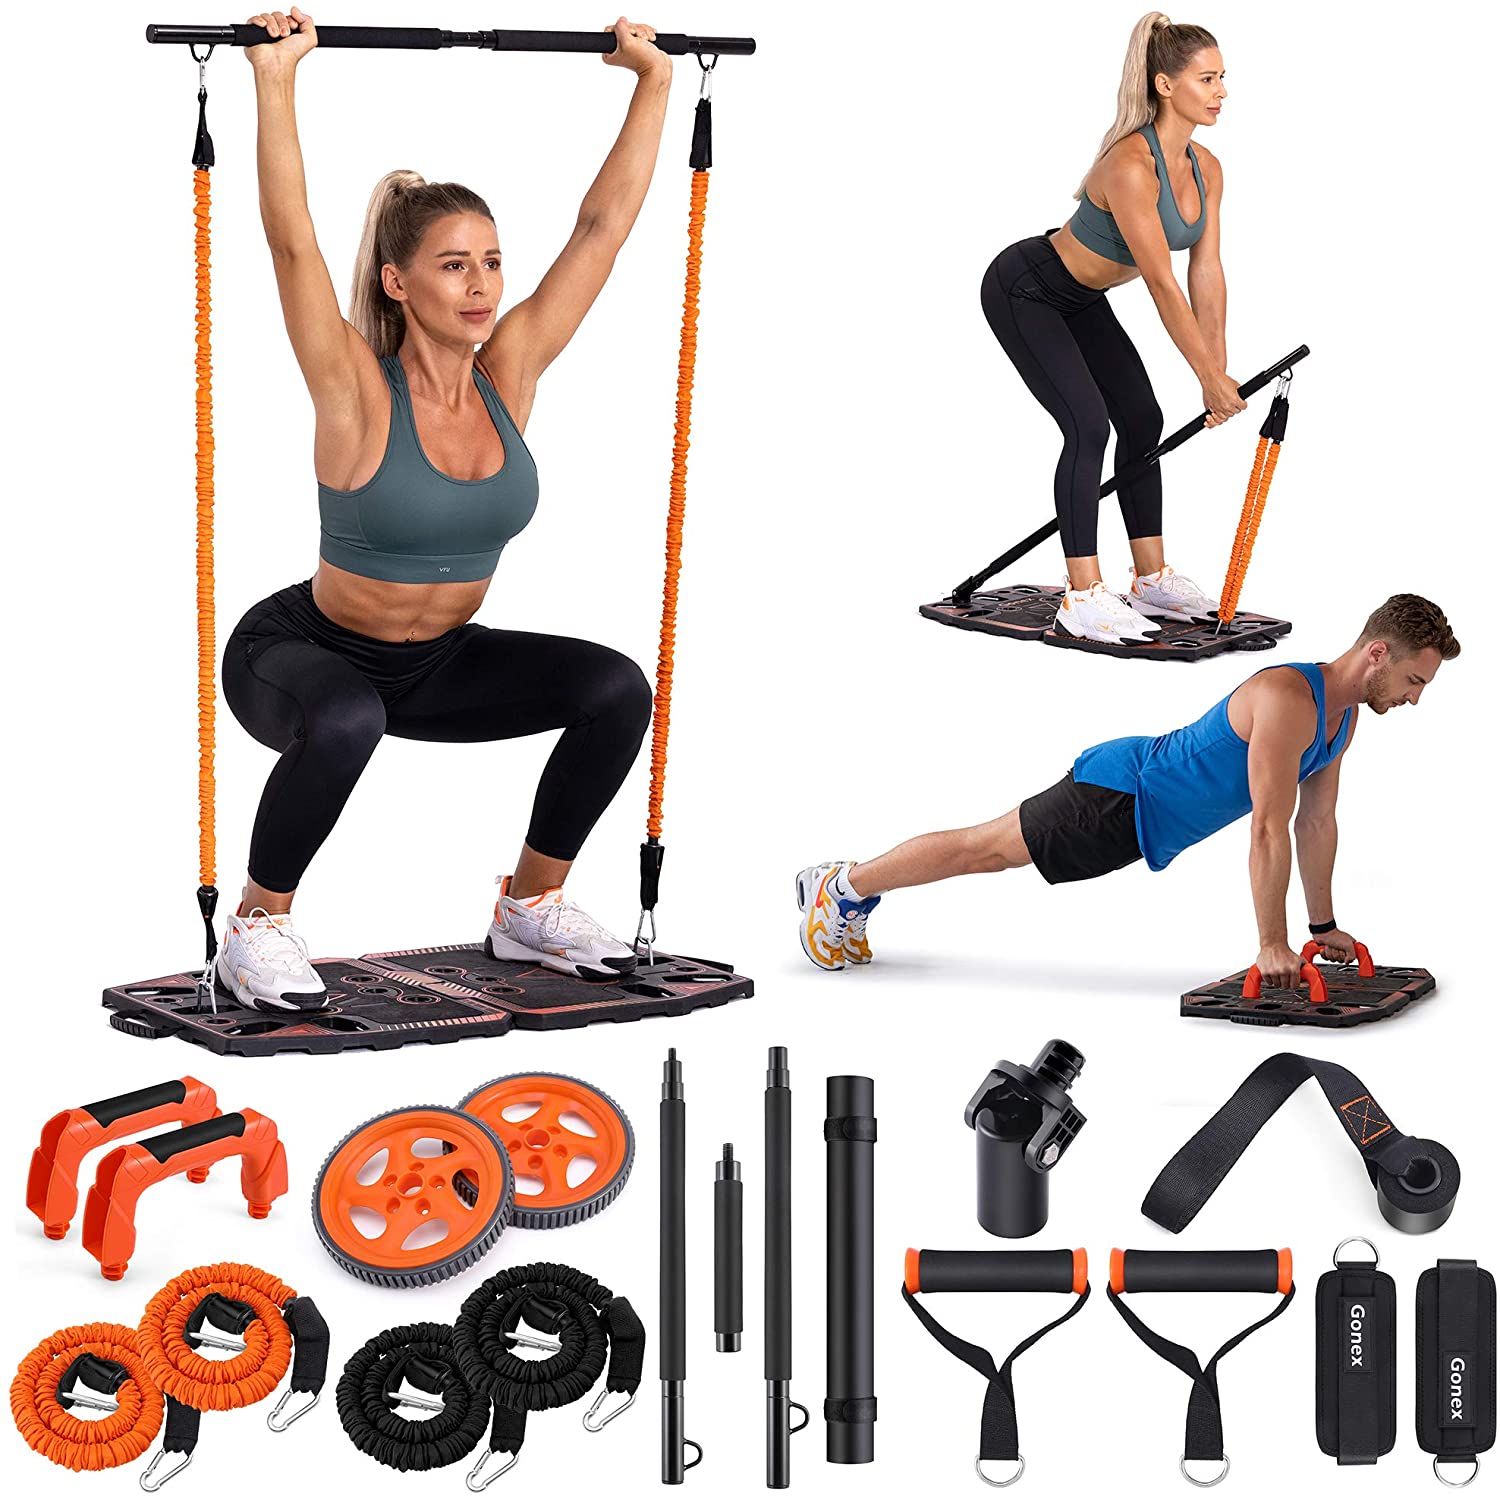 Review of - Gonex Portable Home Gym Workout Equipment